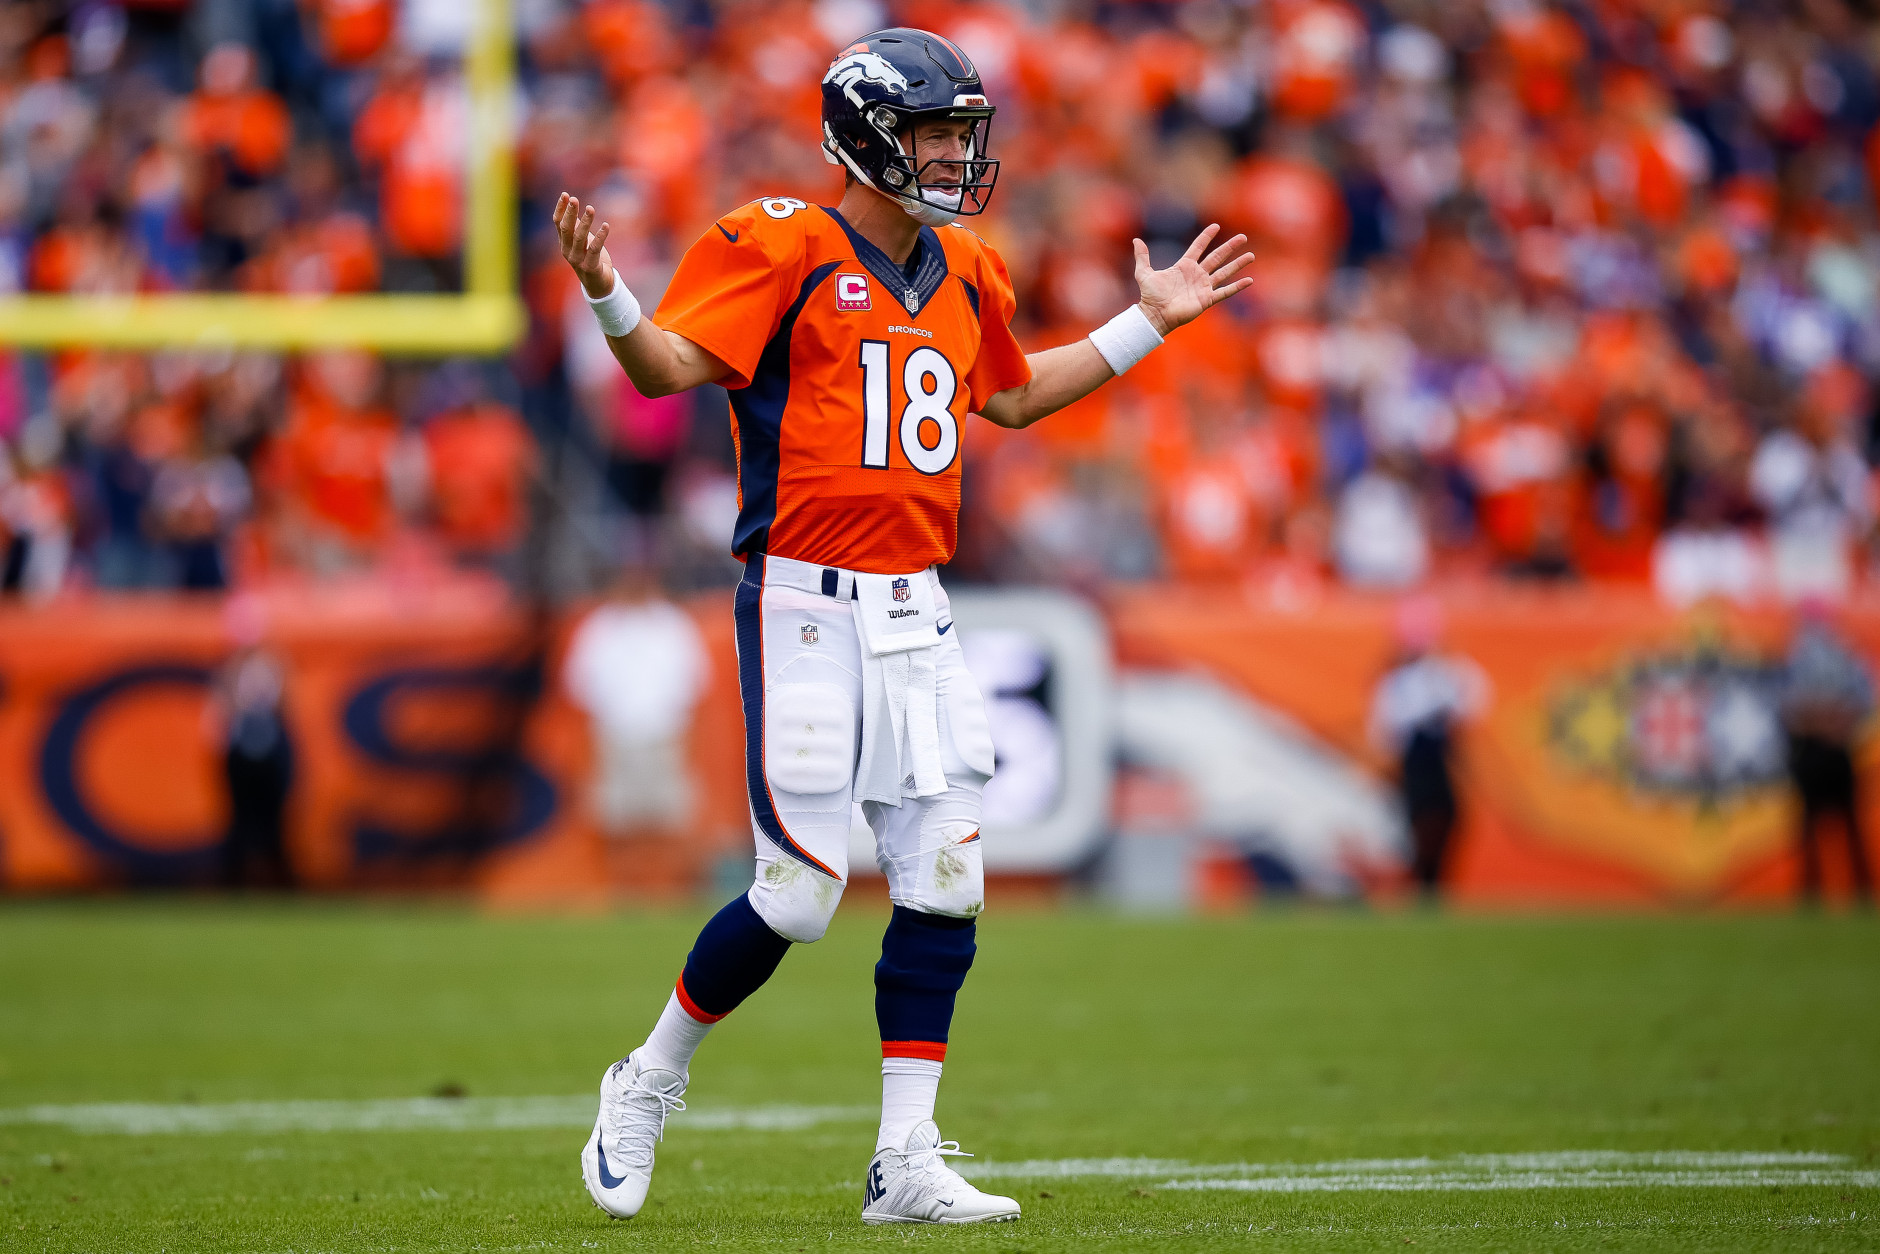 DENVER, CO - OCTOBER 4:  Quarterback Peyton Manning #18 of the Denver Broncos looks toward the sideline during a game against the Minnesota Vikings at Sports Authority Field at Mile High on October 4, 2015 in Denver, Colorado.  (Photo by Justin Edmonds/Getty Images)